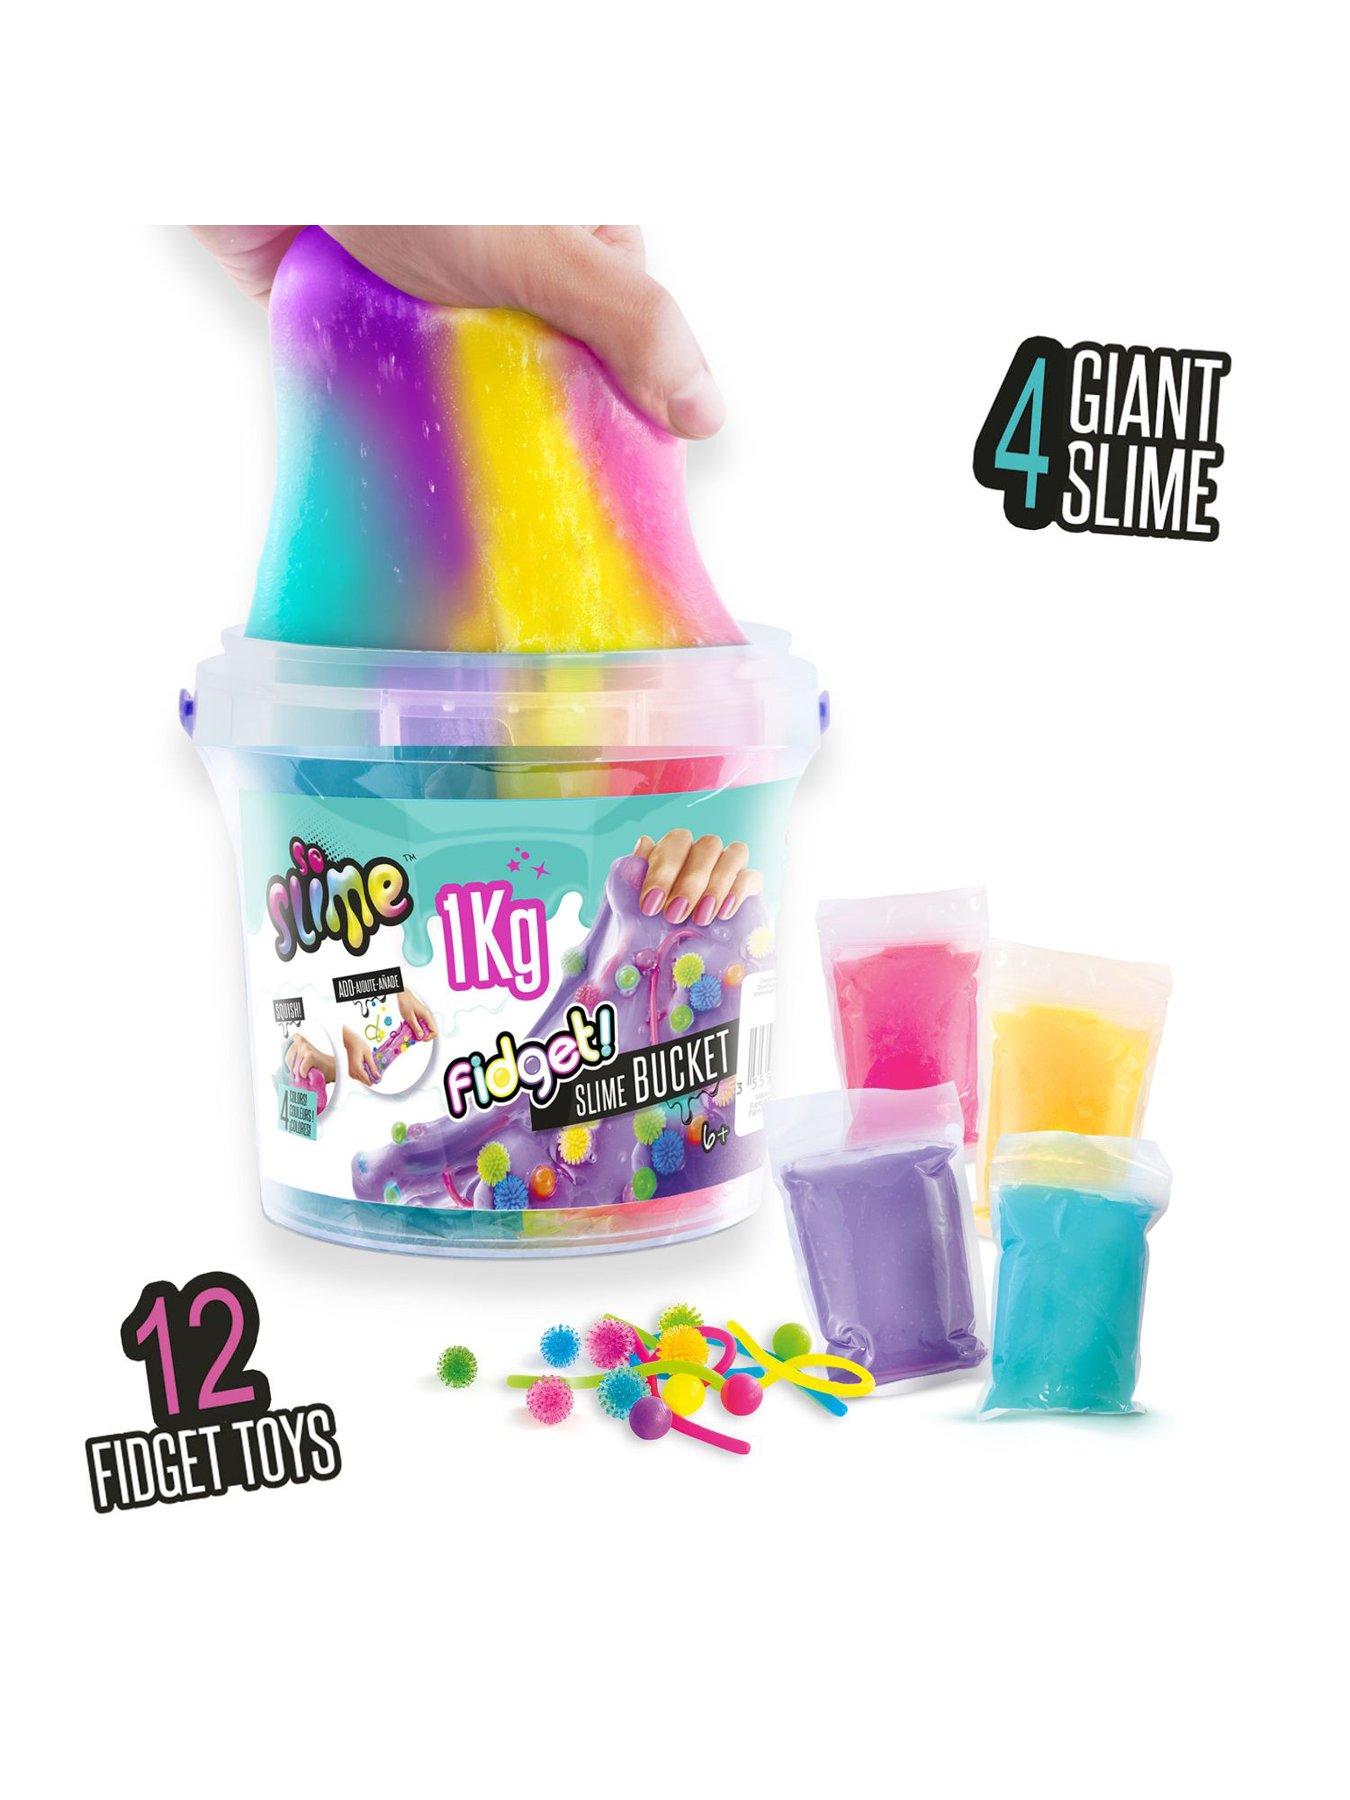 Canal Toys So Slime Glow Slime 5 Pack! Fun Glow in The Dark Slime Kit with  Container. Stretch, Squish & Play!